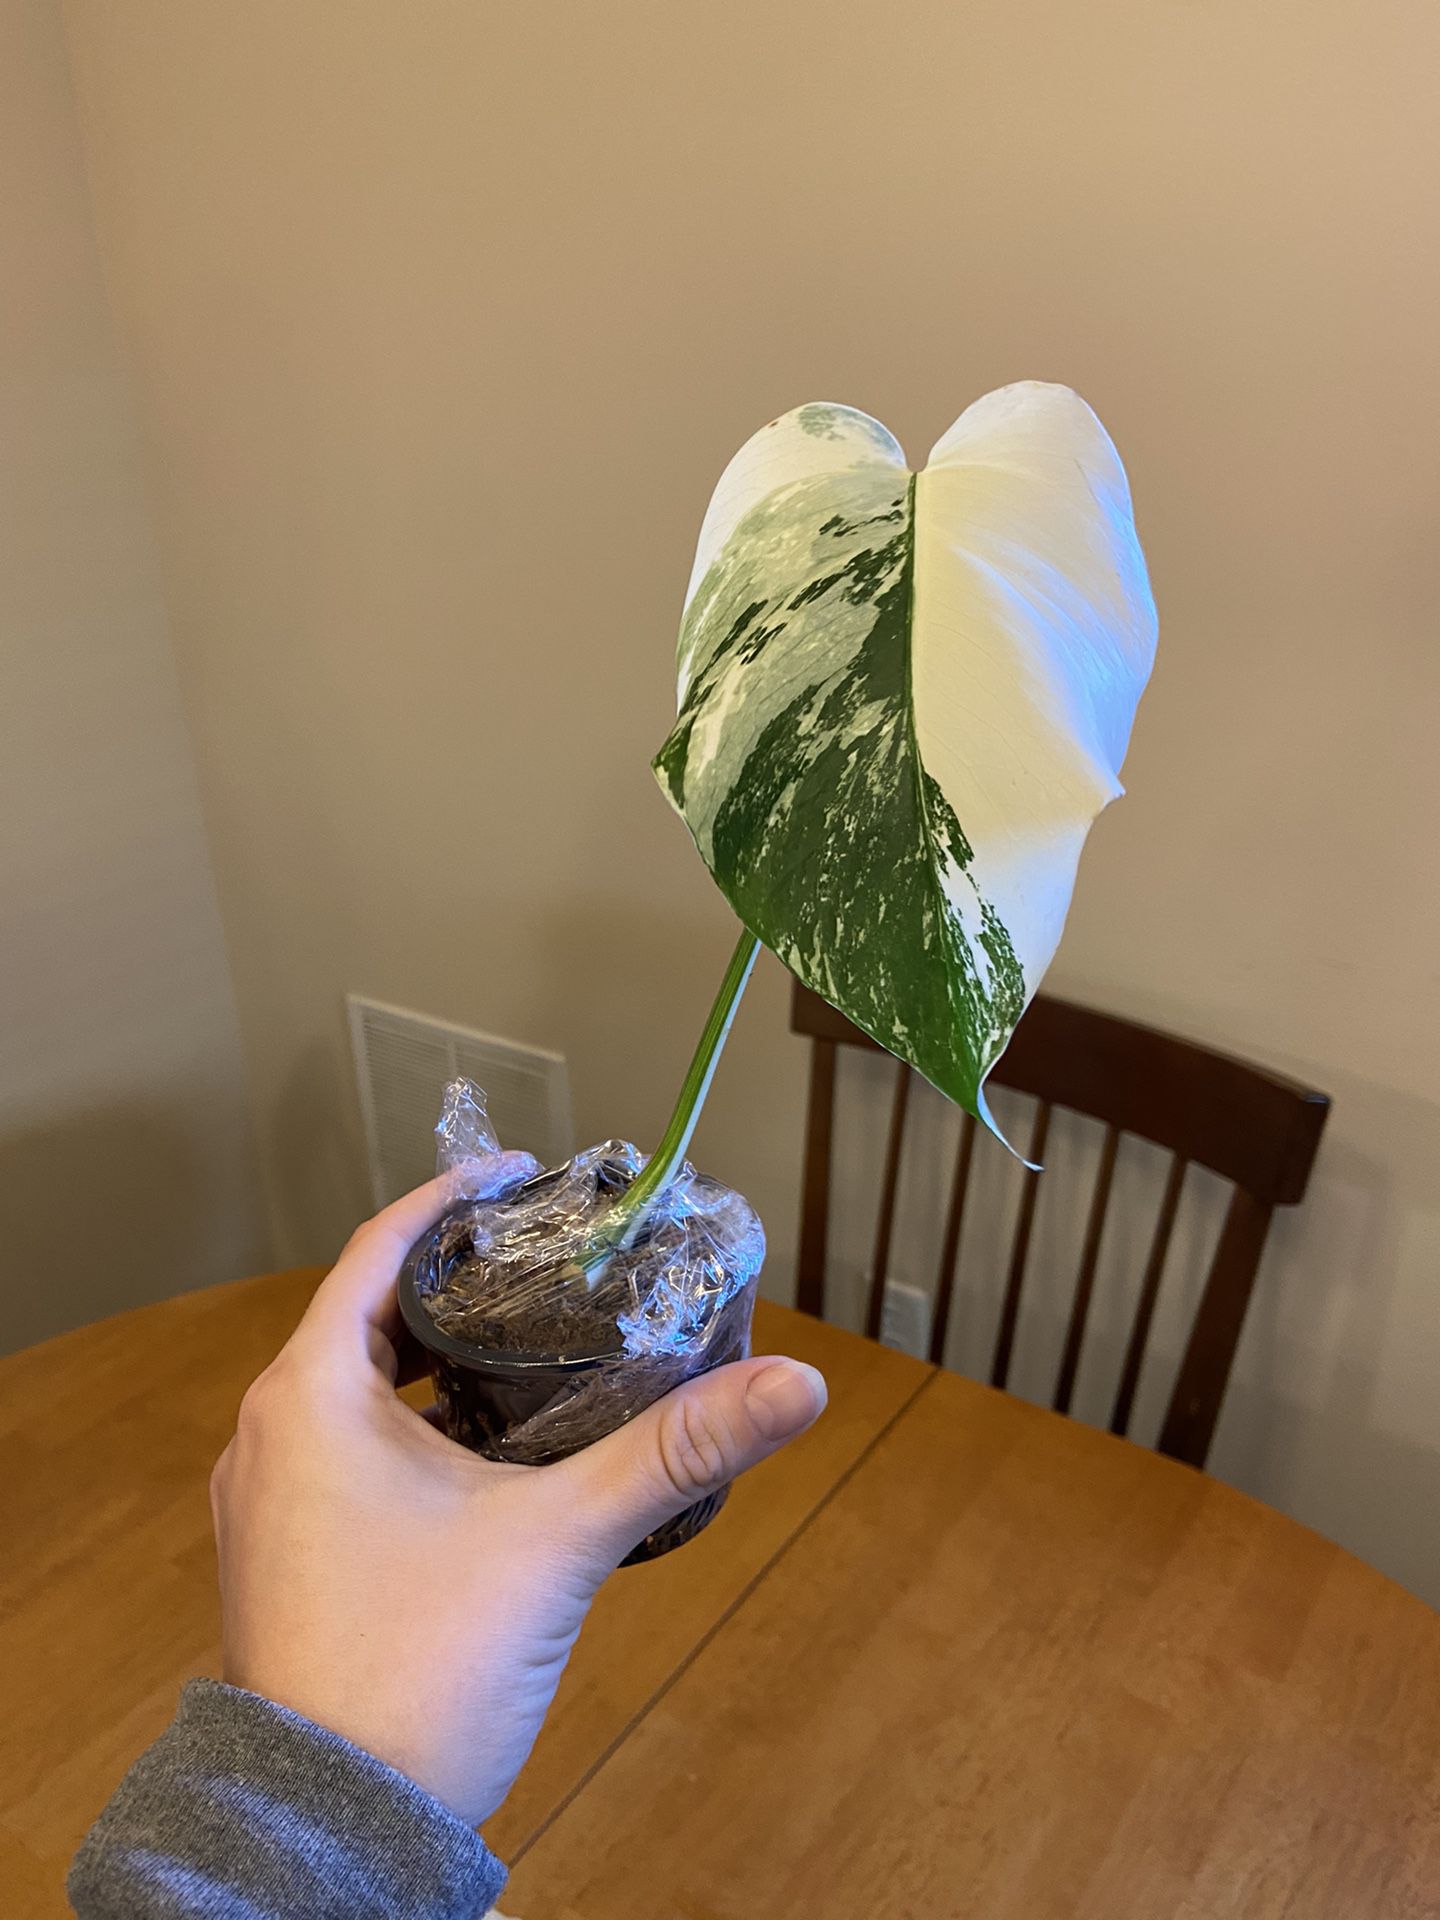 Variegated Monstera Albo Rooted Cutting